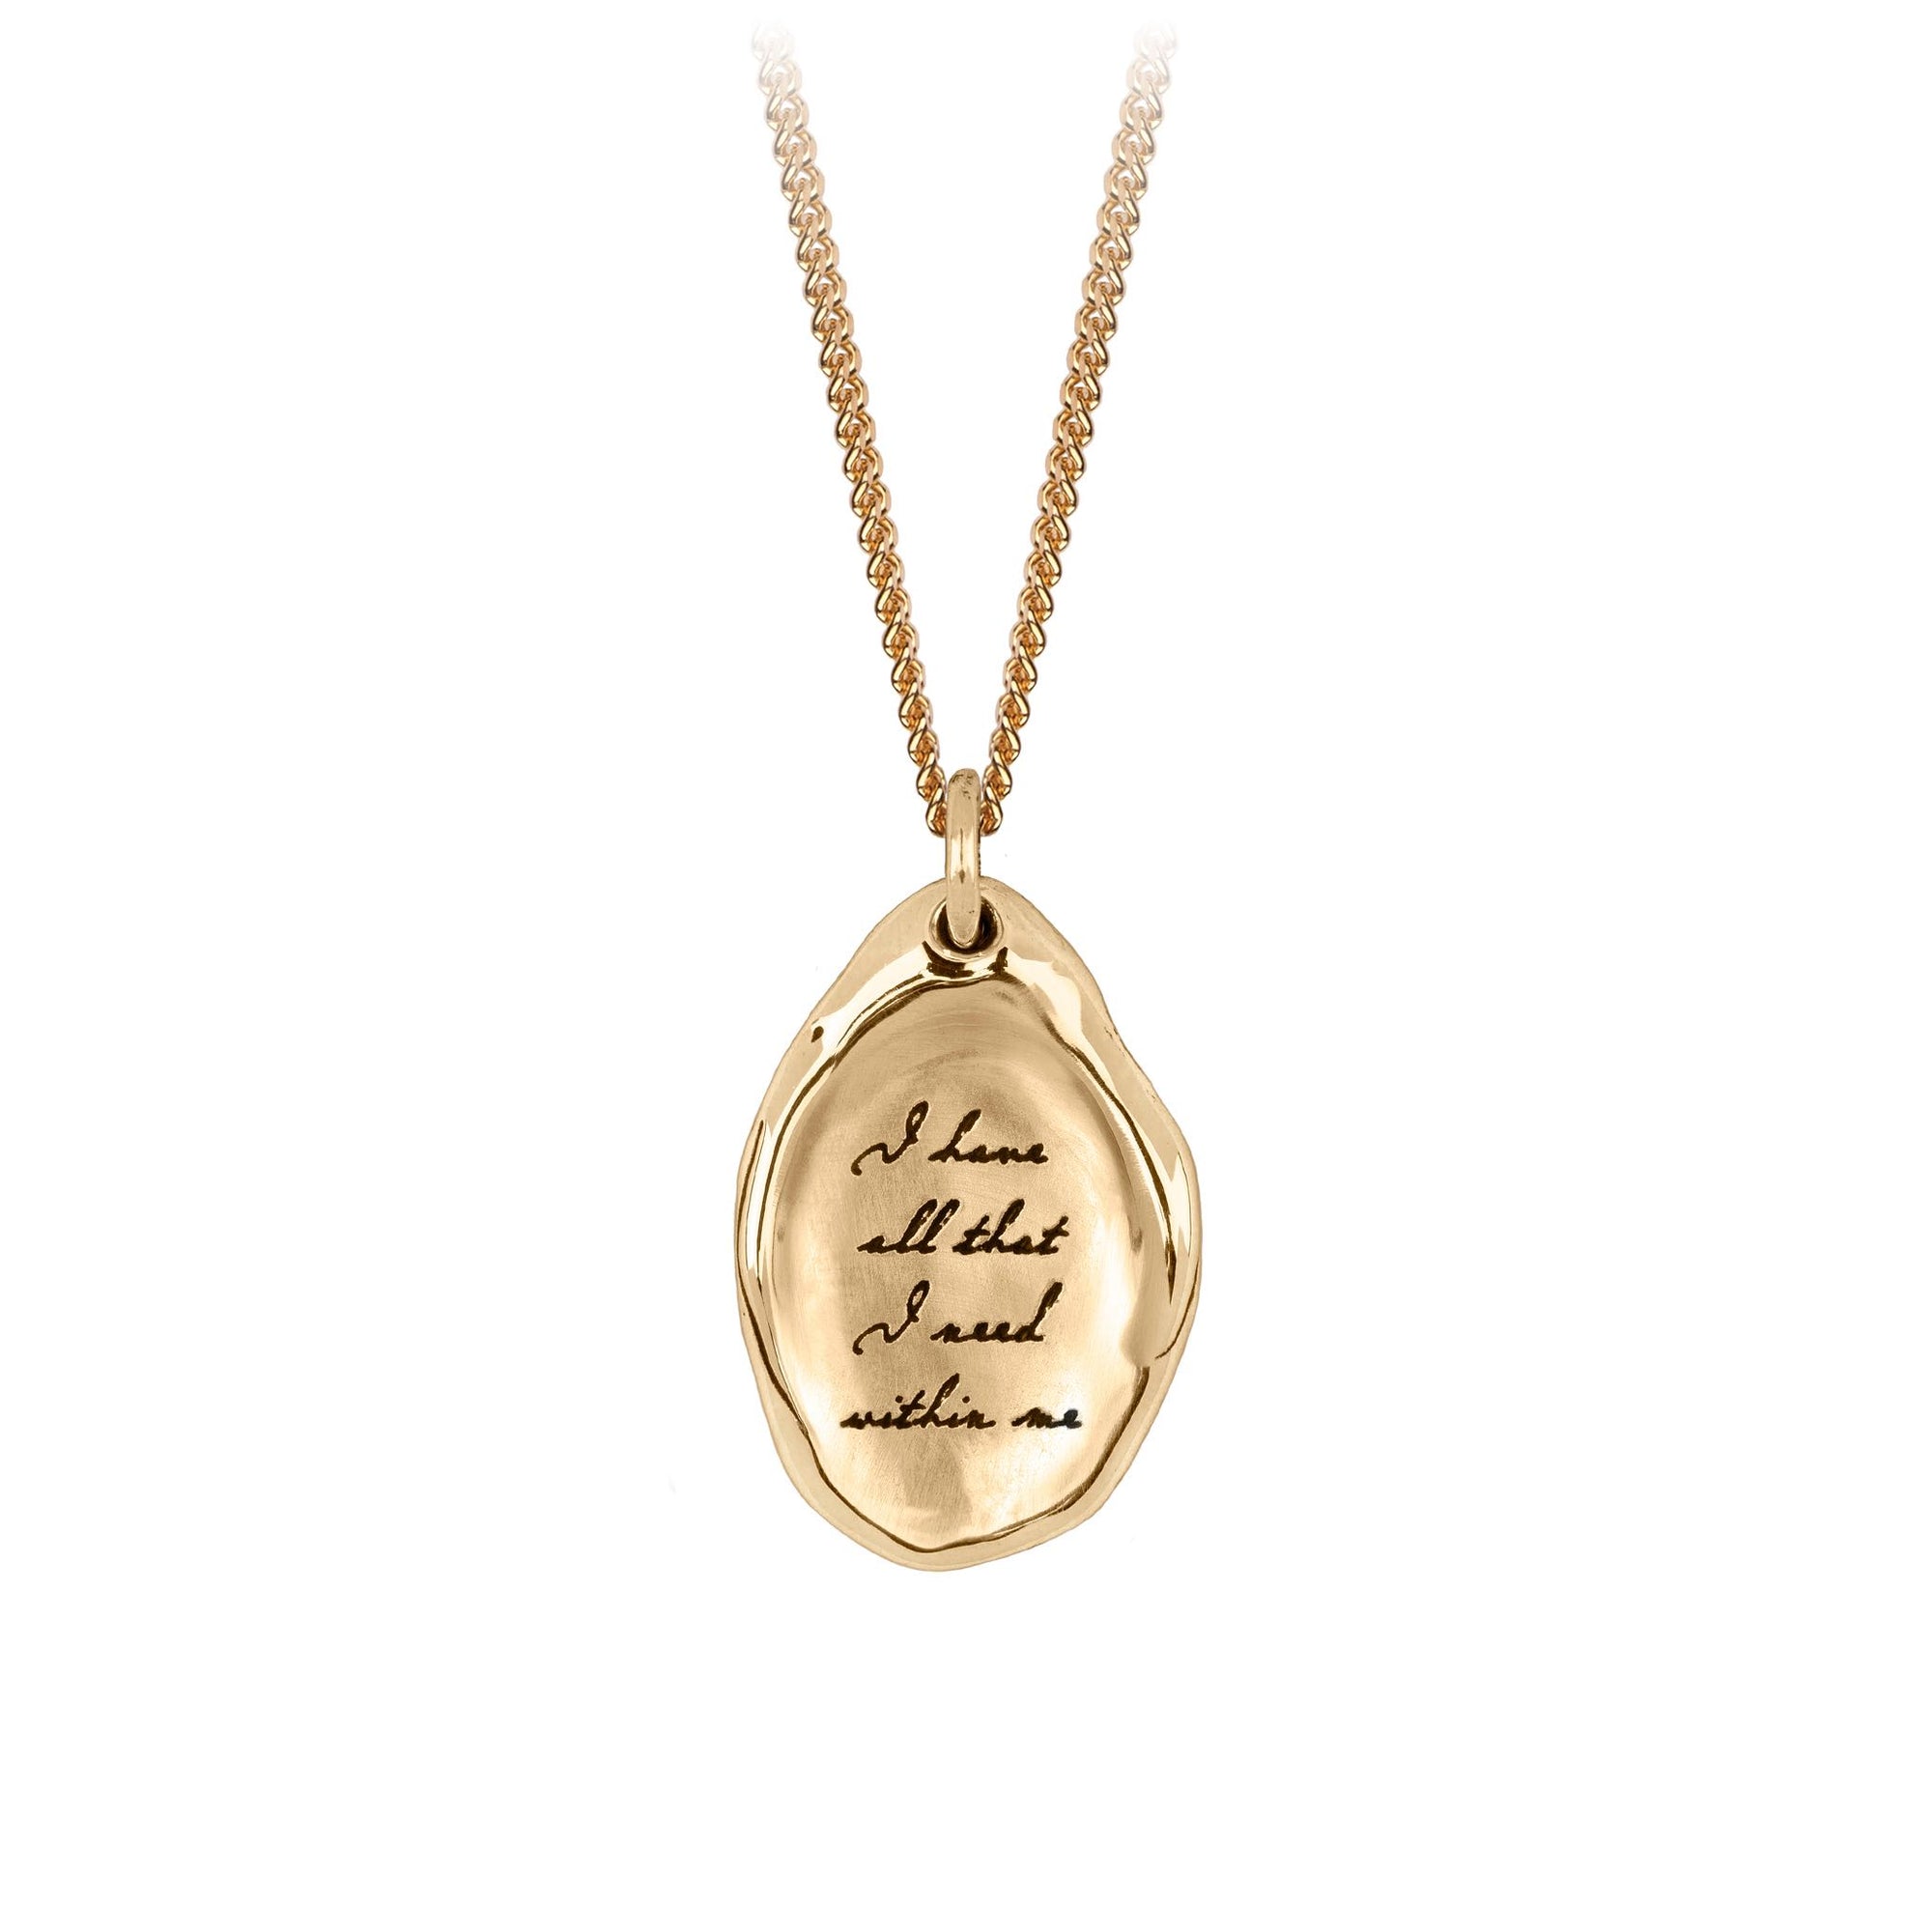 I Have All That I Need Within Me 14K Gold Affirmation Talisman